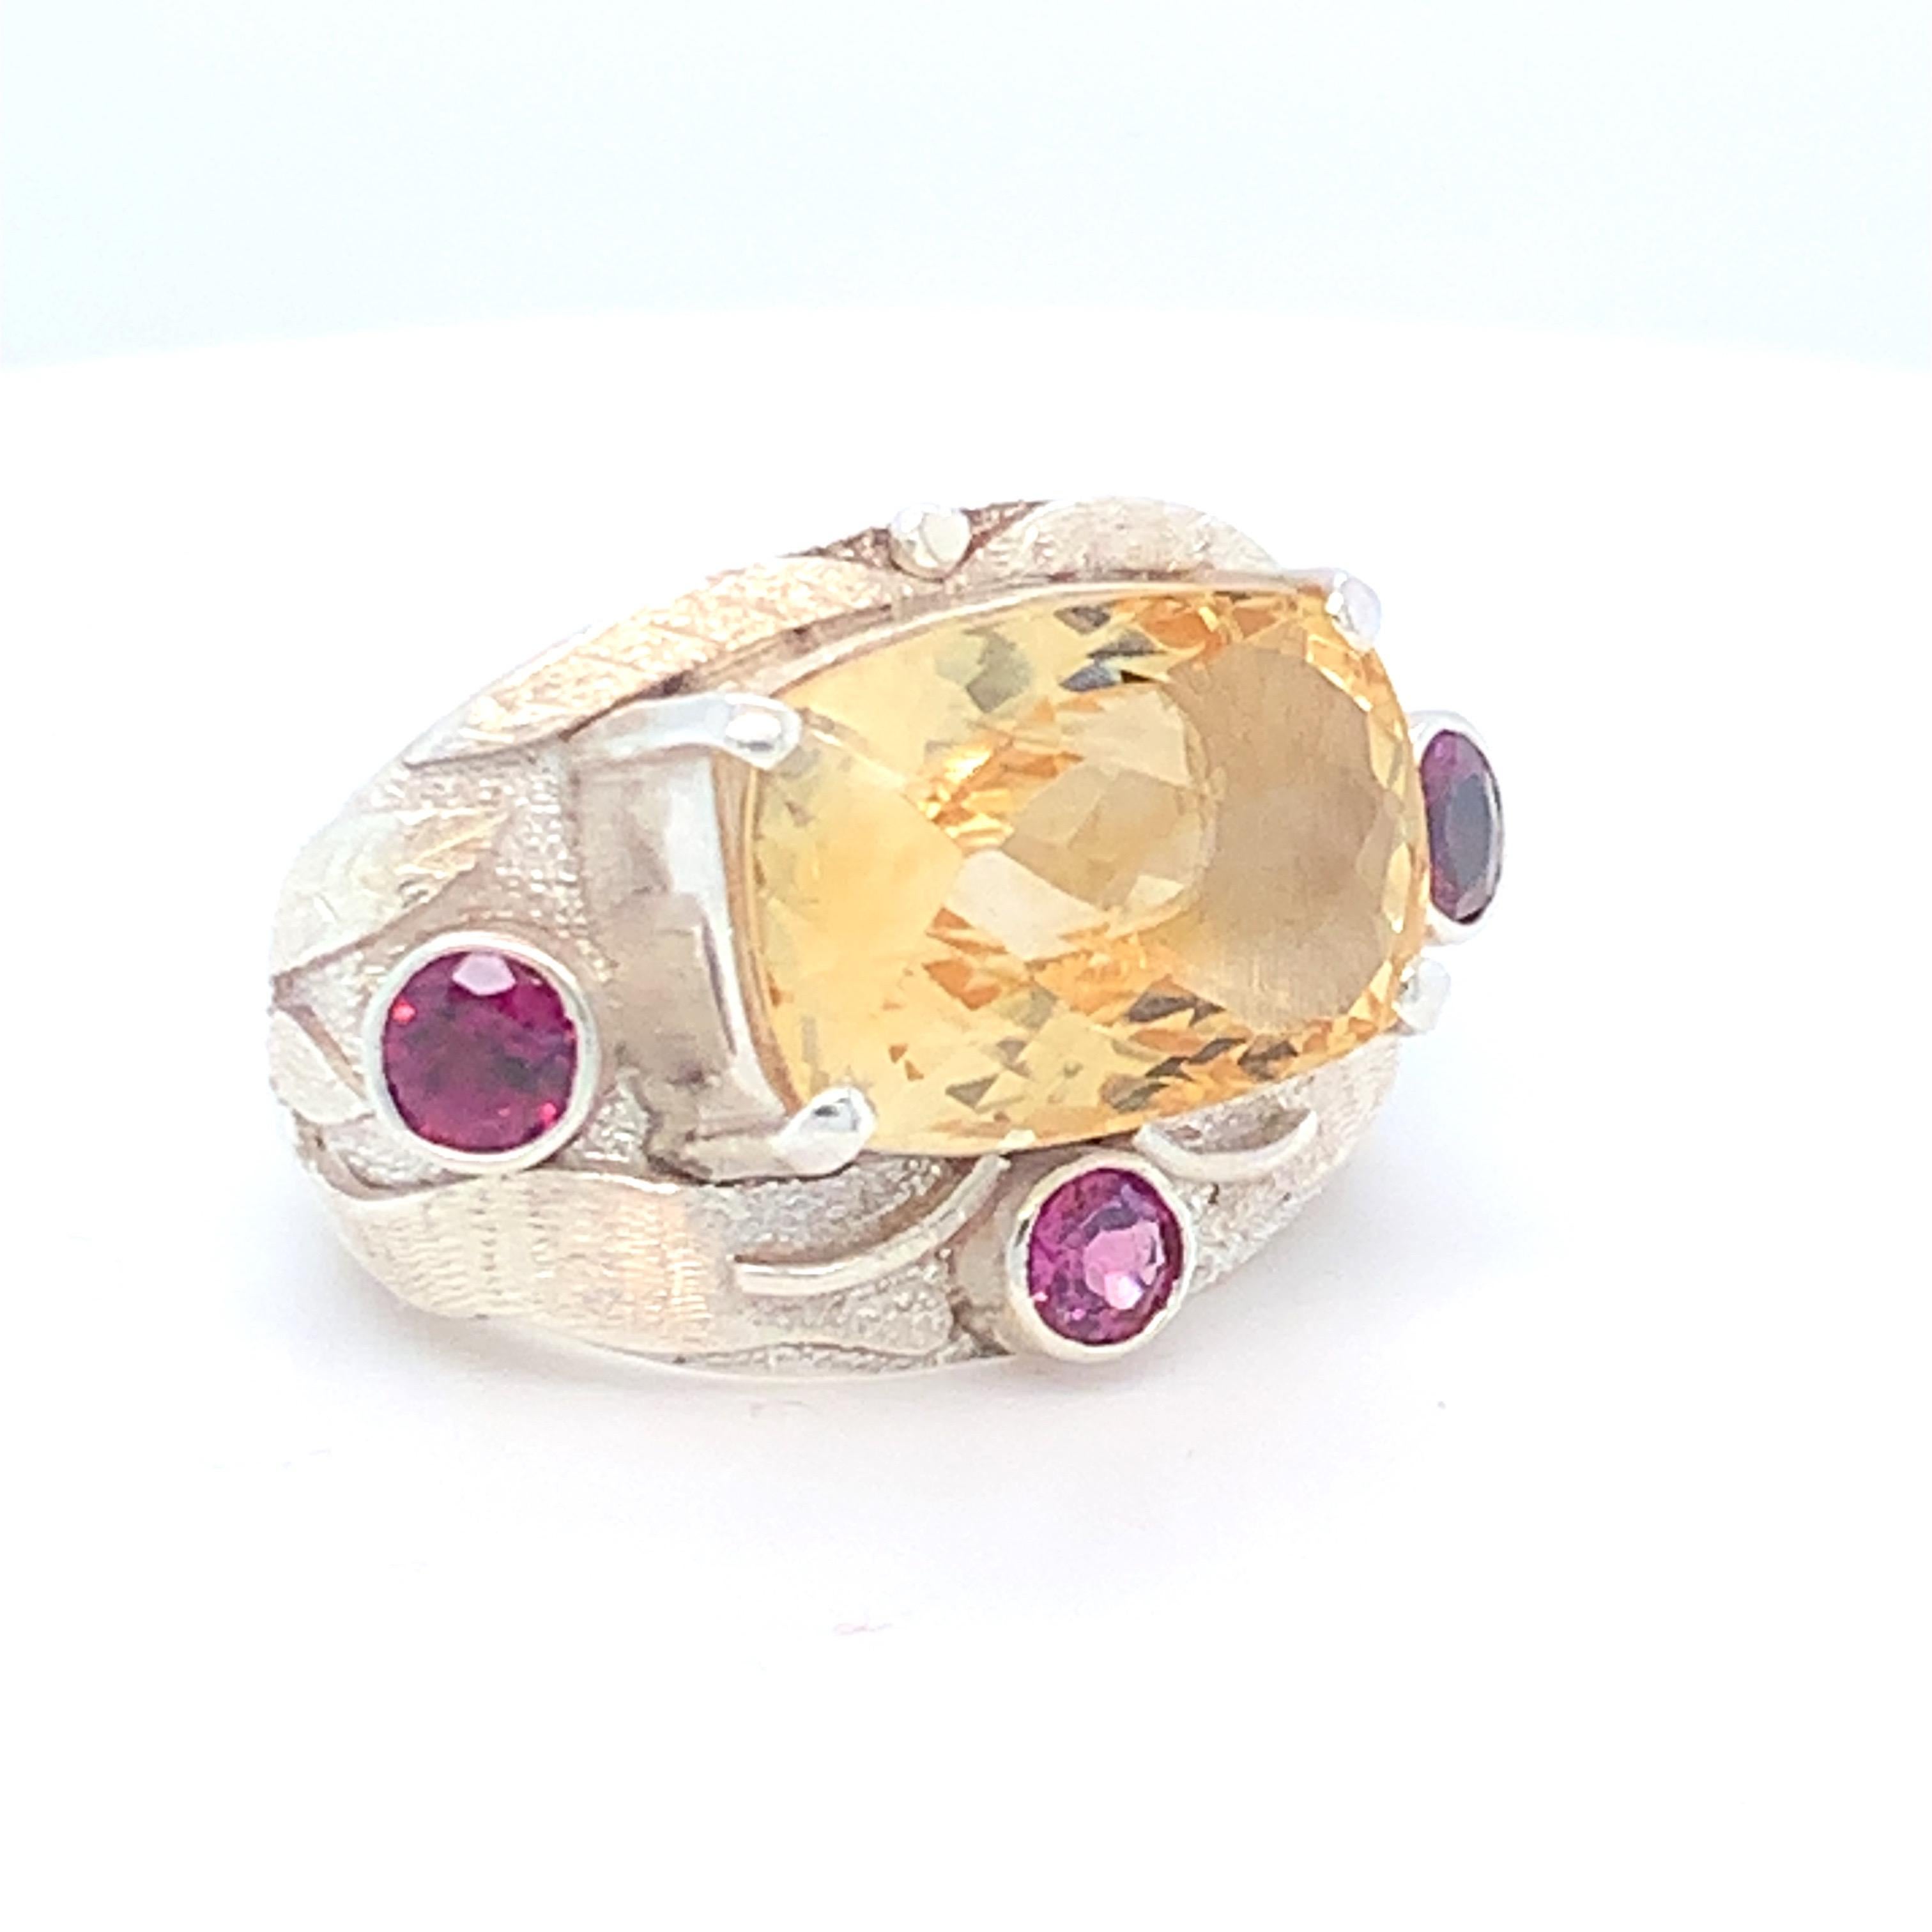 Checkerboard citrine is the main stone in this beautiful cocktail ring. Round rhodolites are used on three sides of the main stone. Set in sterling silver and made by hand.
Approximate size:
Citrine: 11.00ct
Rhodolite: 0.75ct